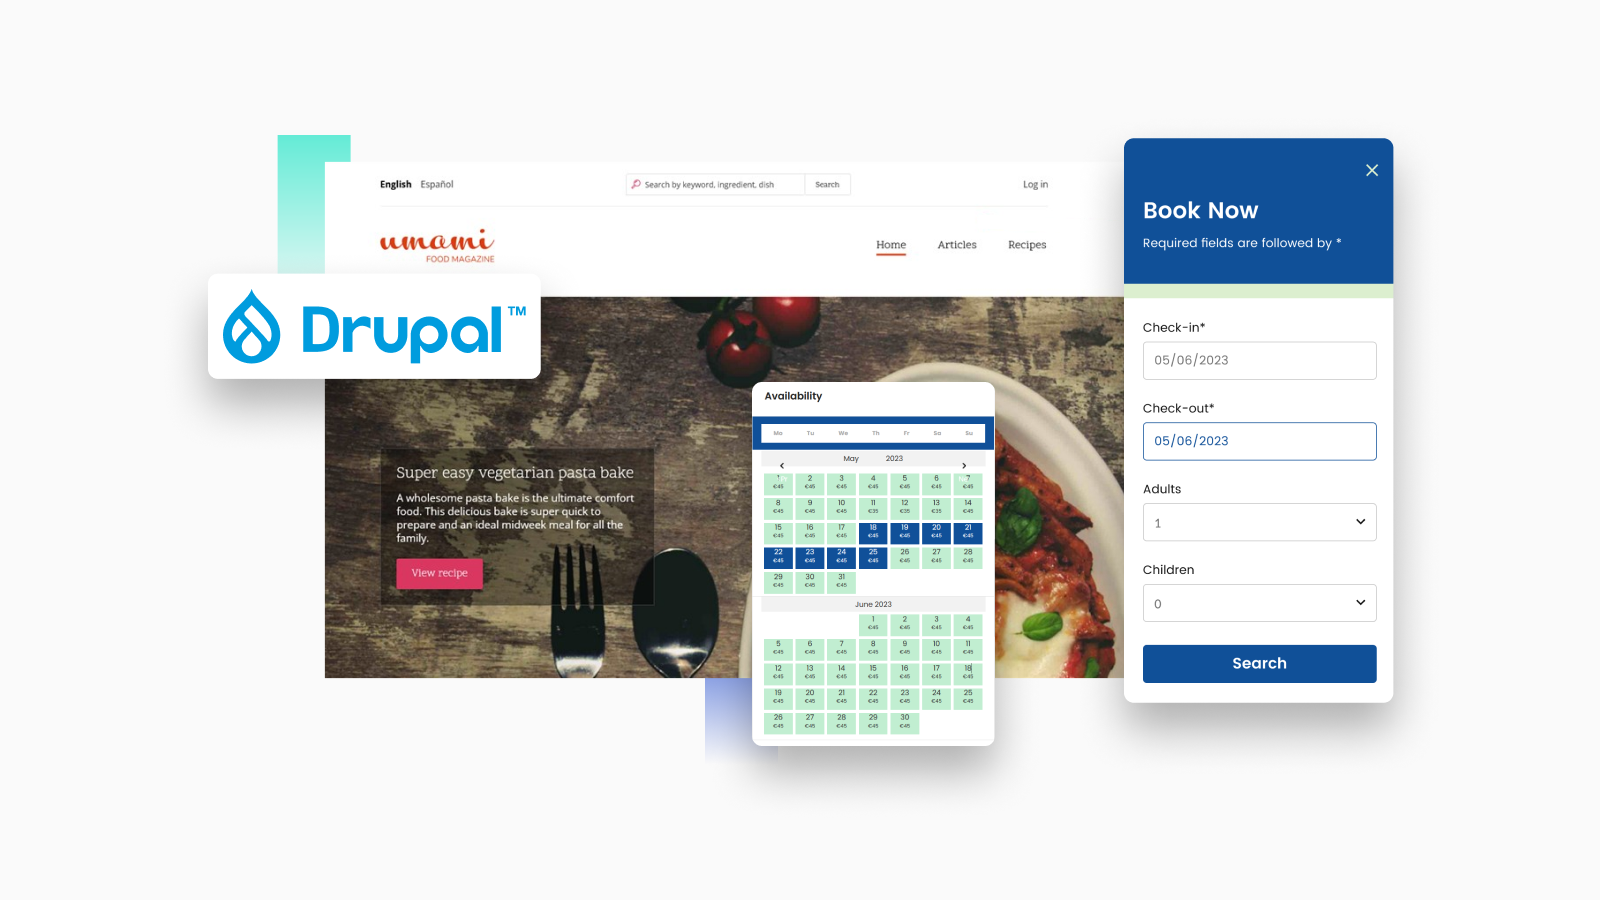 Drupal booking system and BNBForms booking widget.